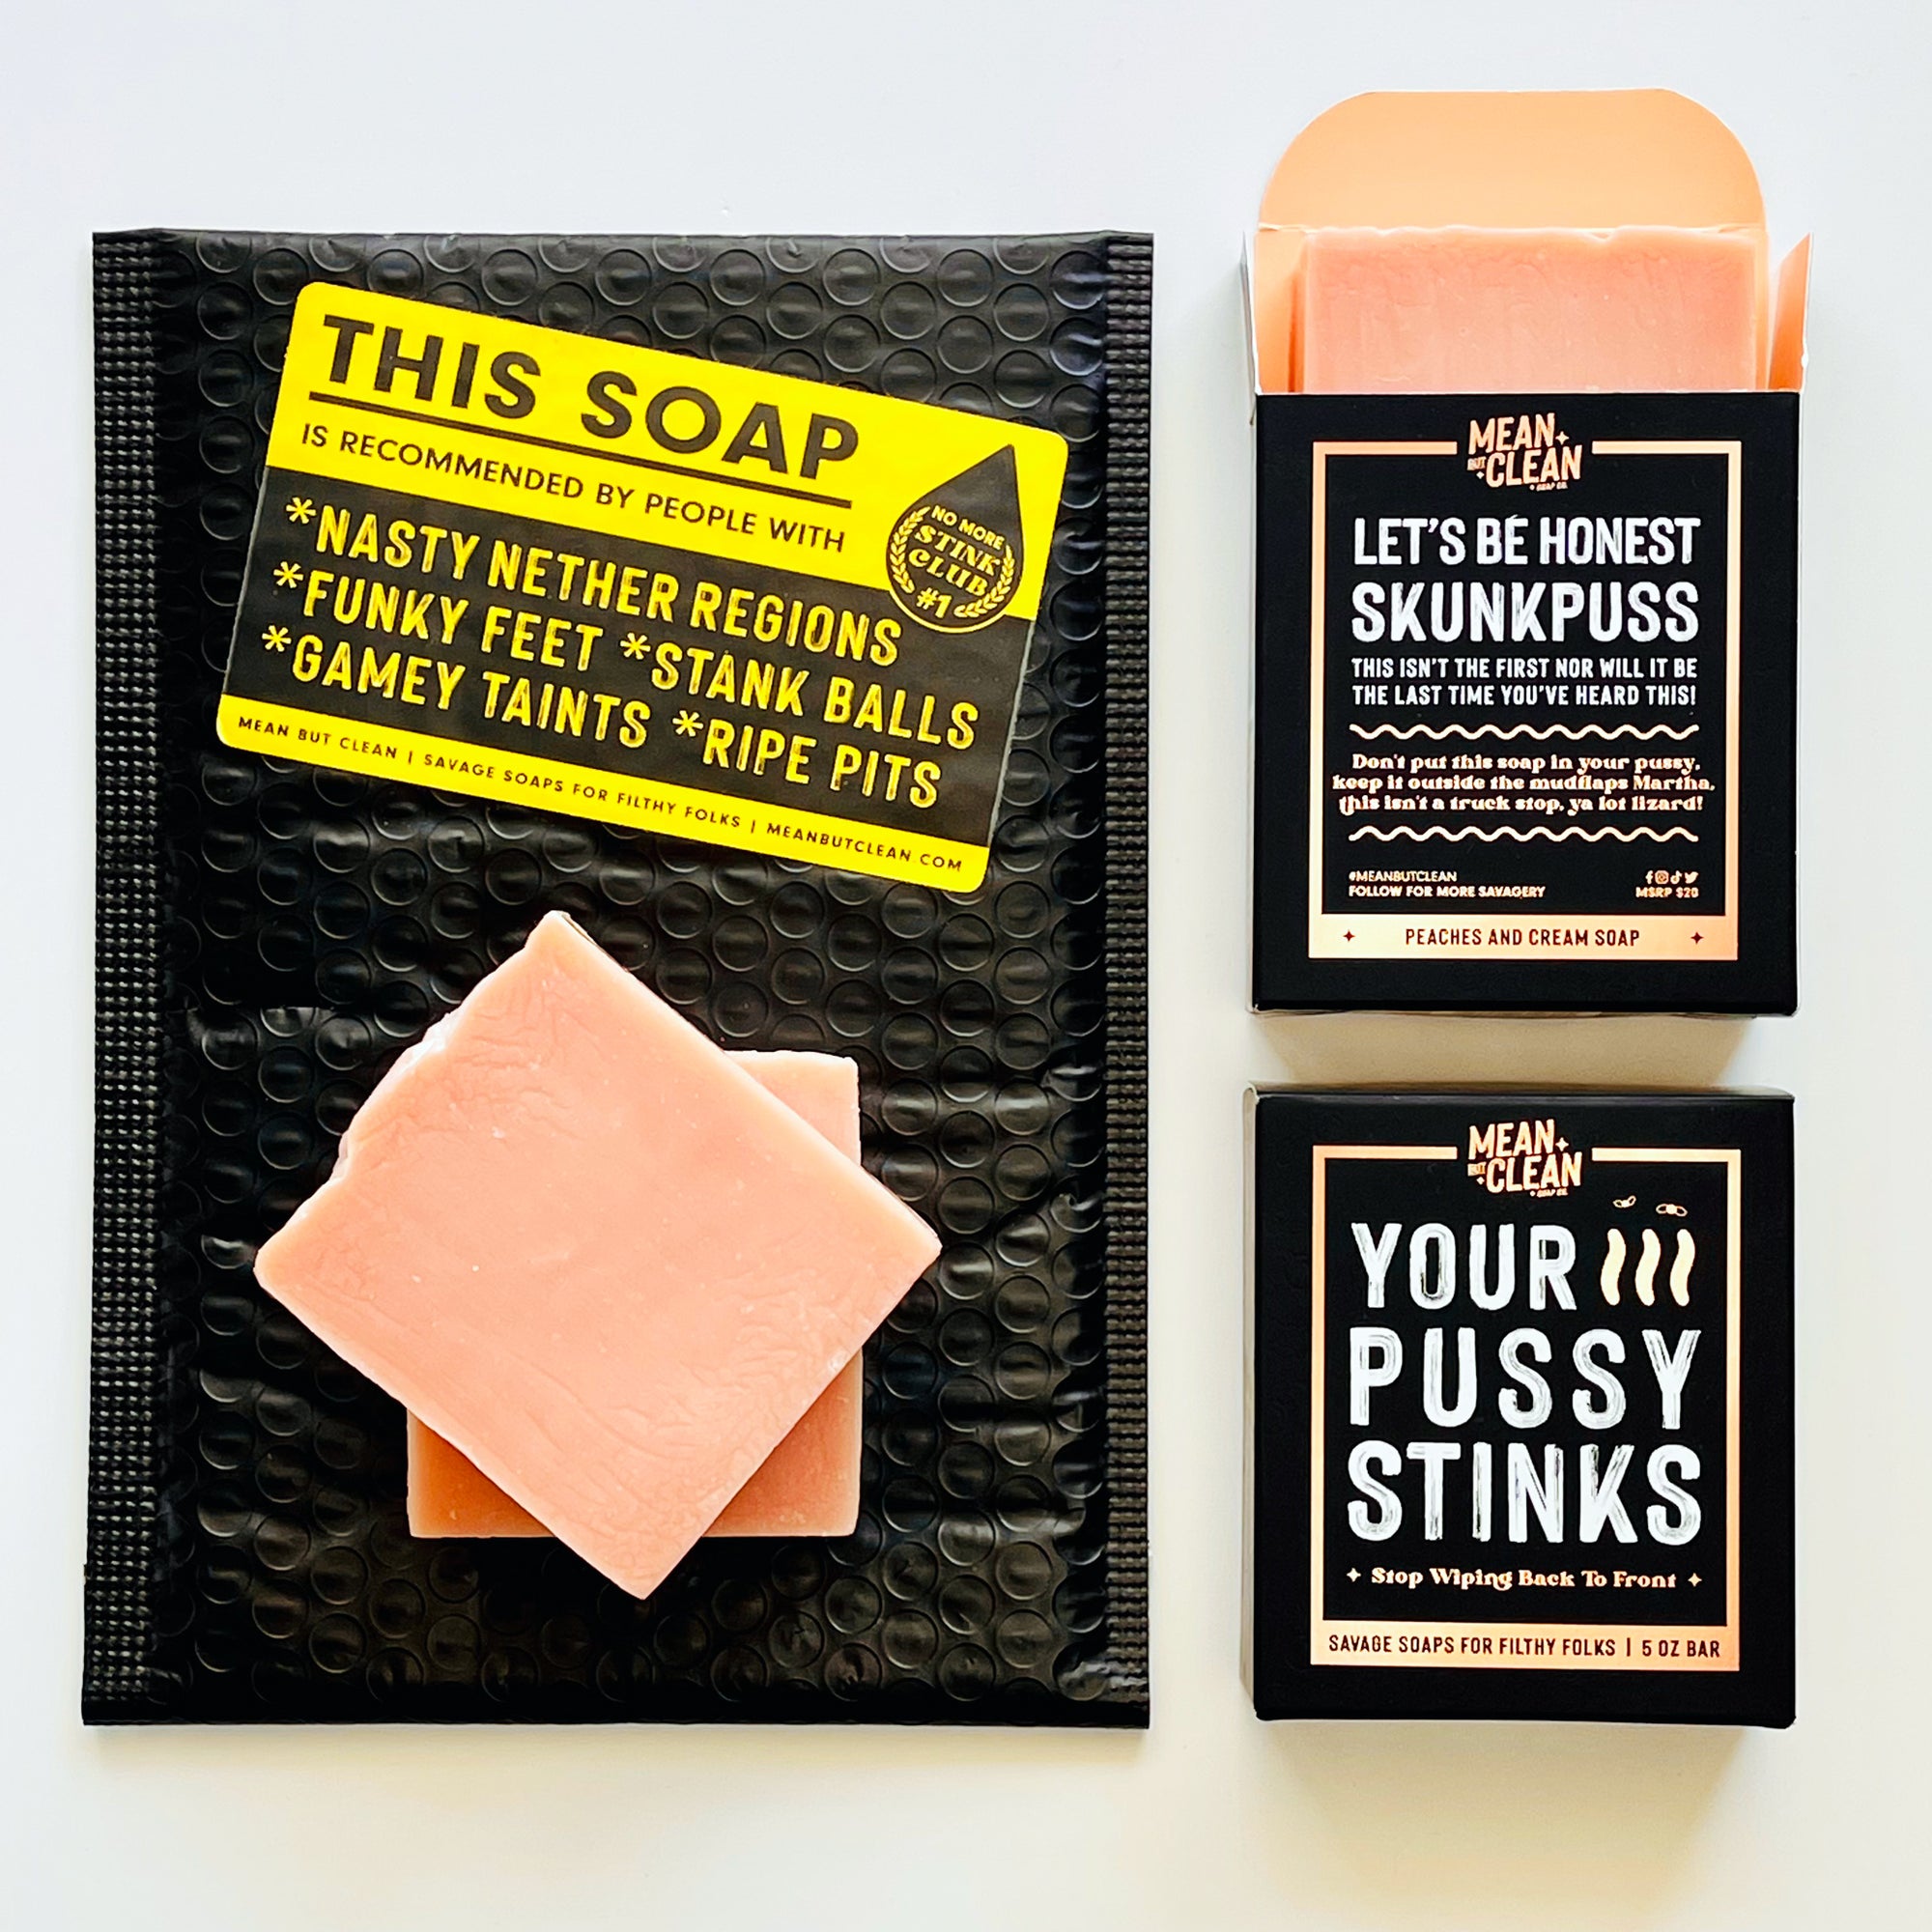 Your Pussy Stinks - Peaches and Cream Soap